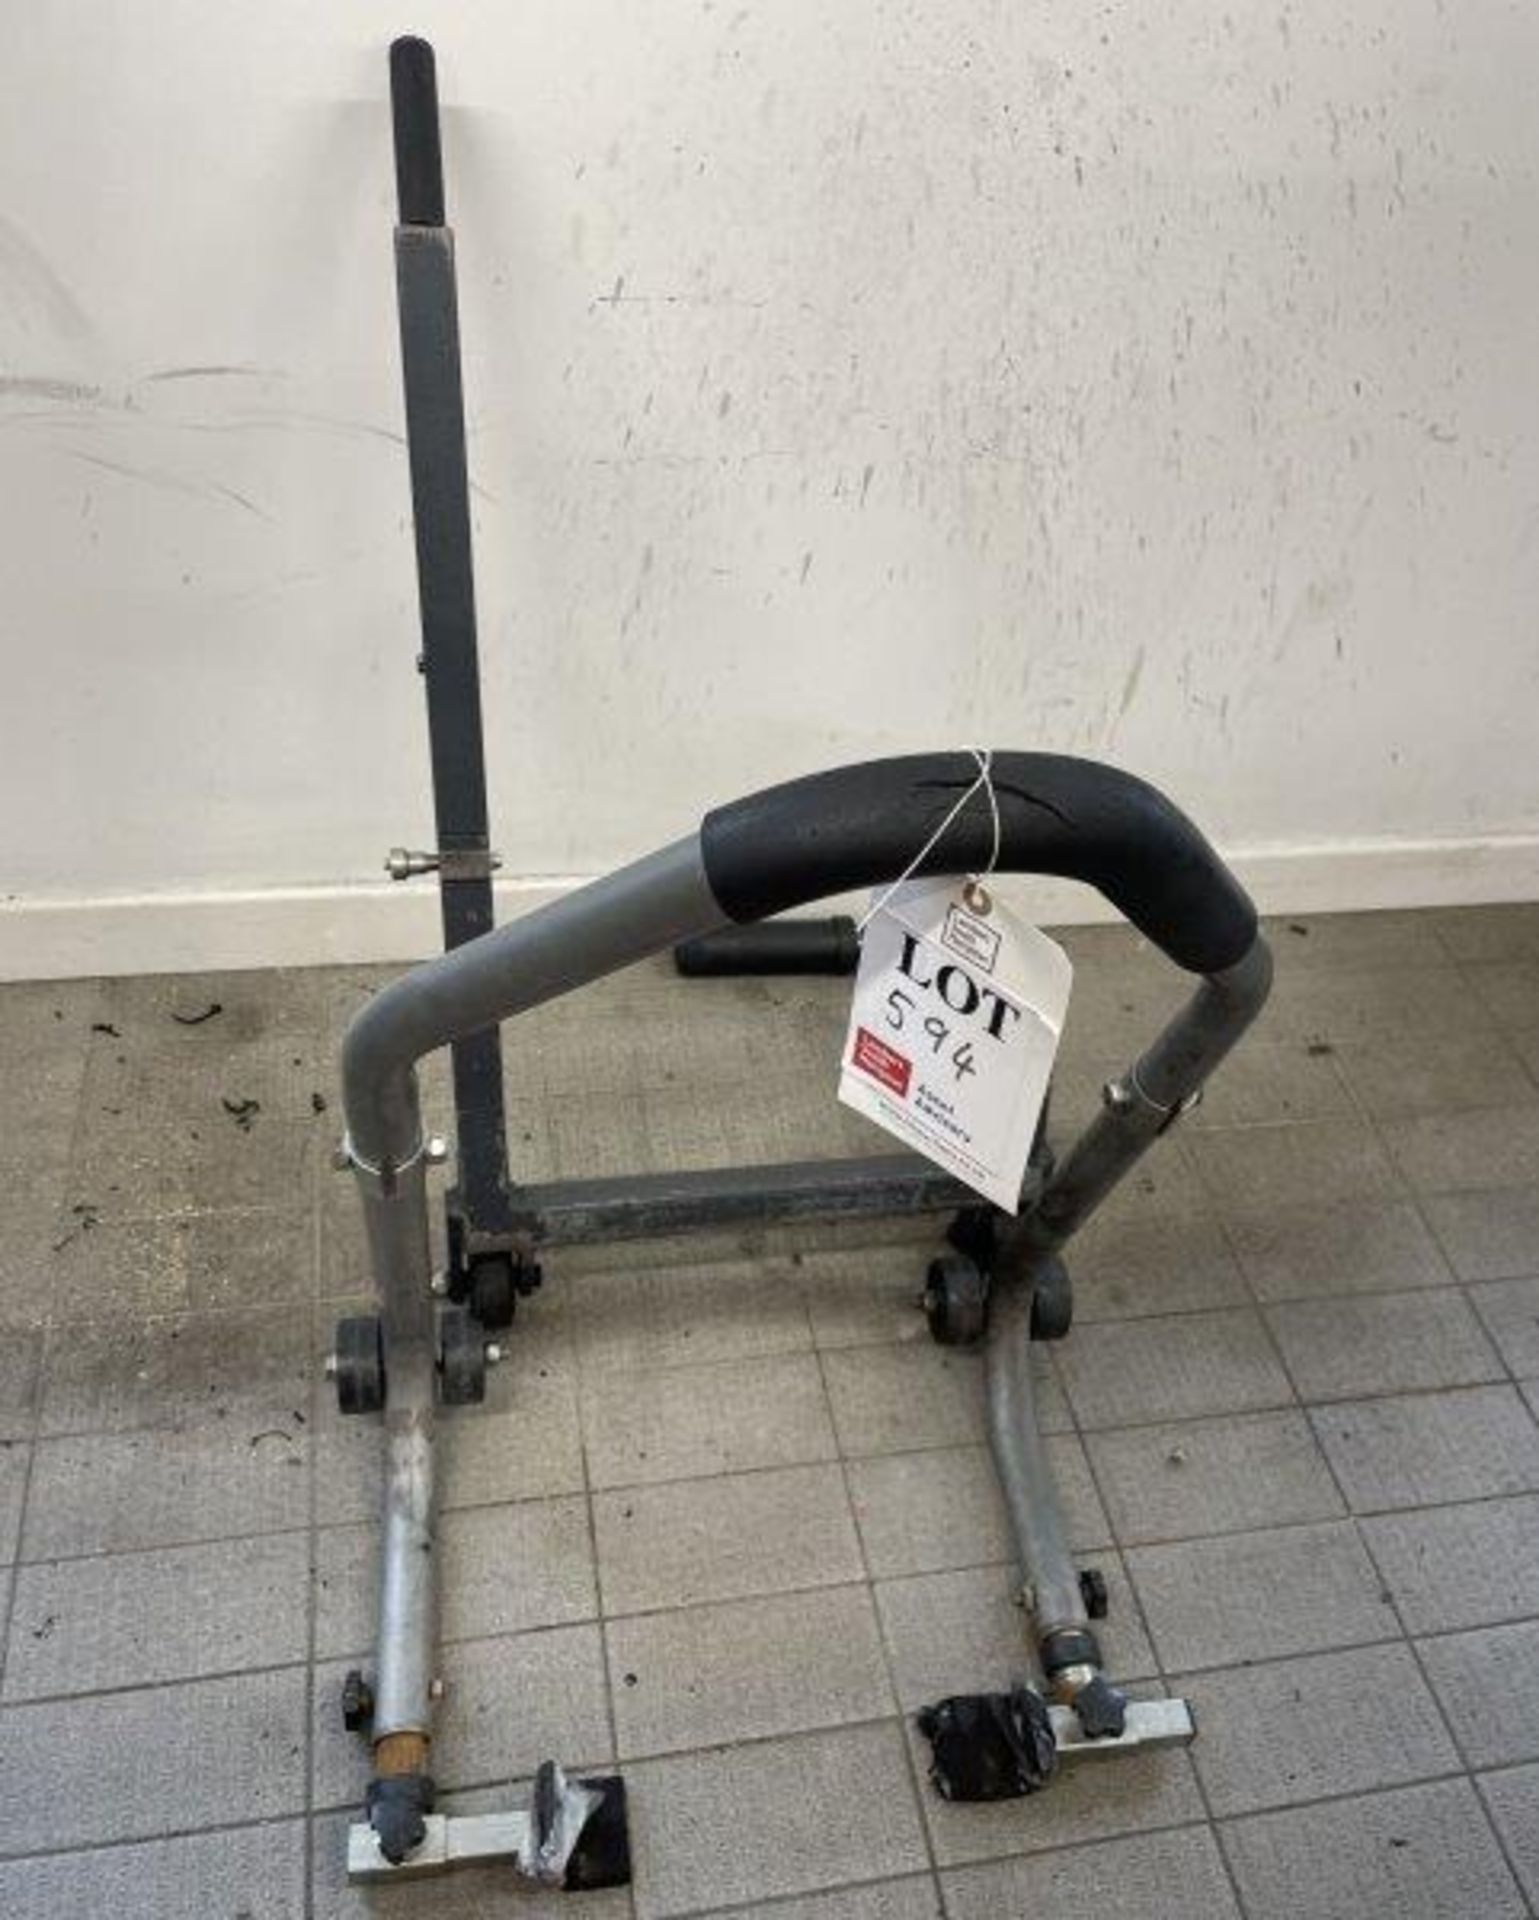 2 x Bike Lifters / Stands